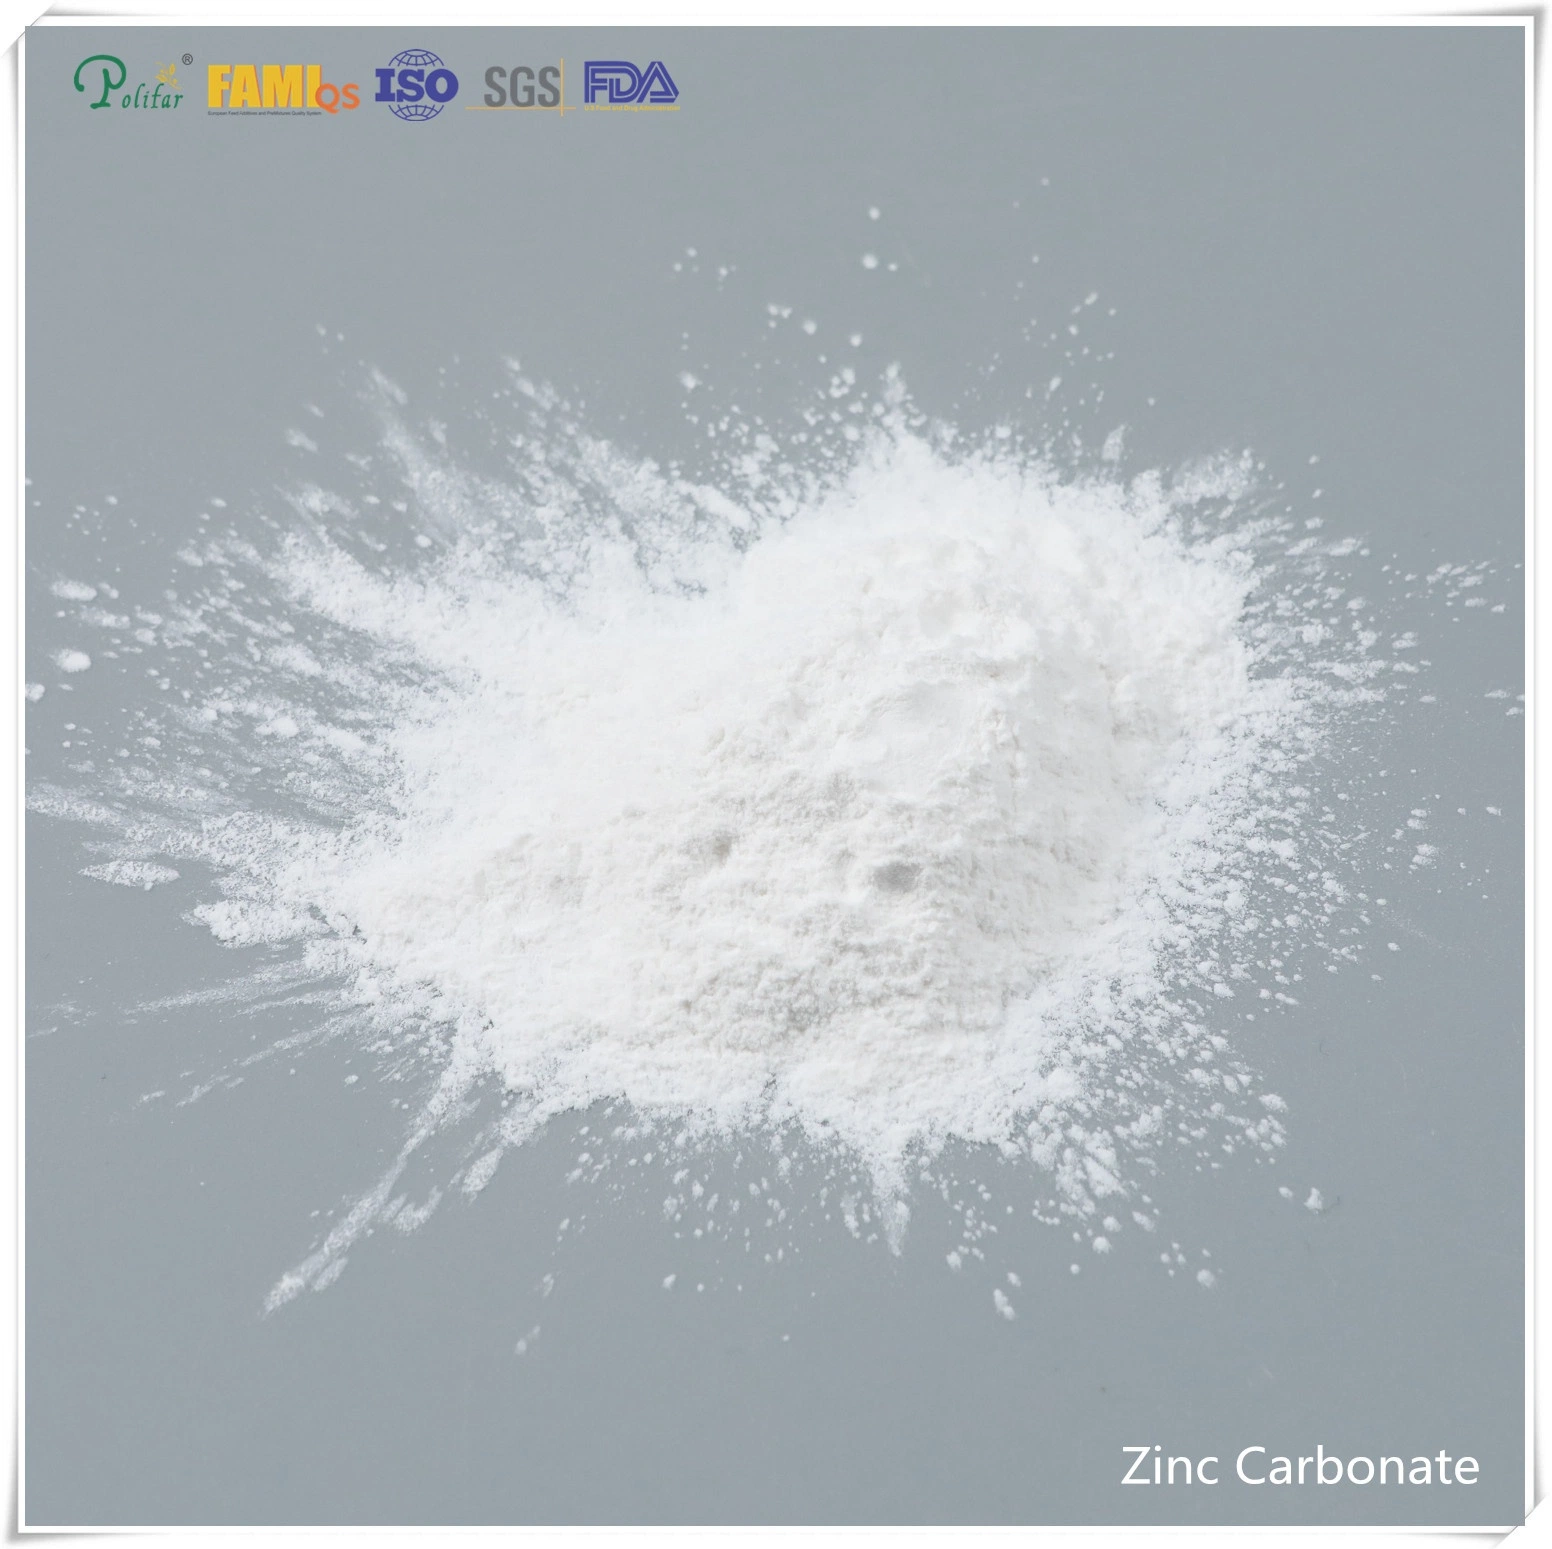 Zinc Carbonate for Pourty with FDA